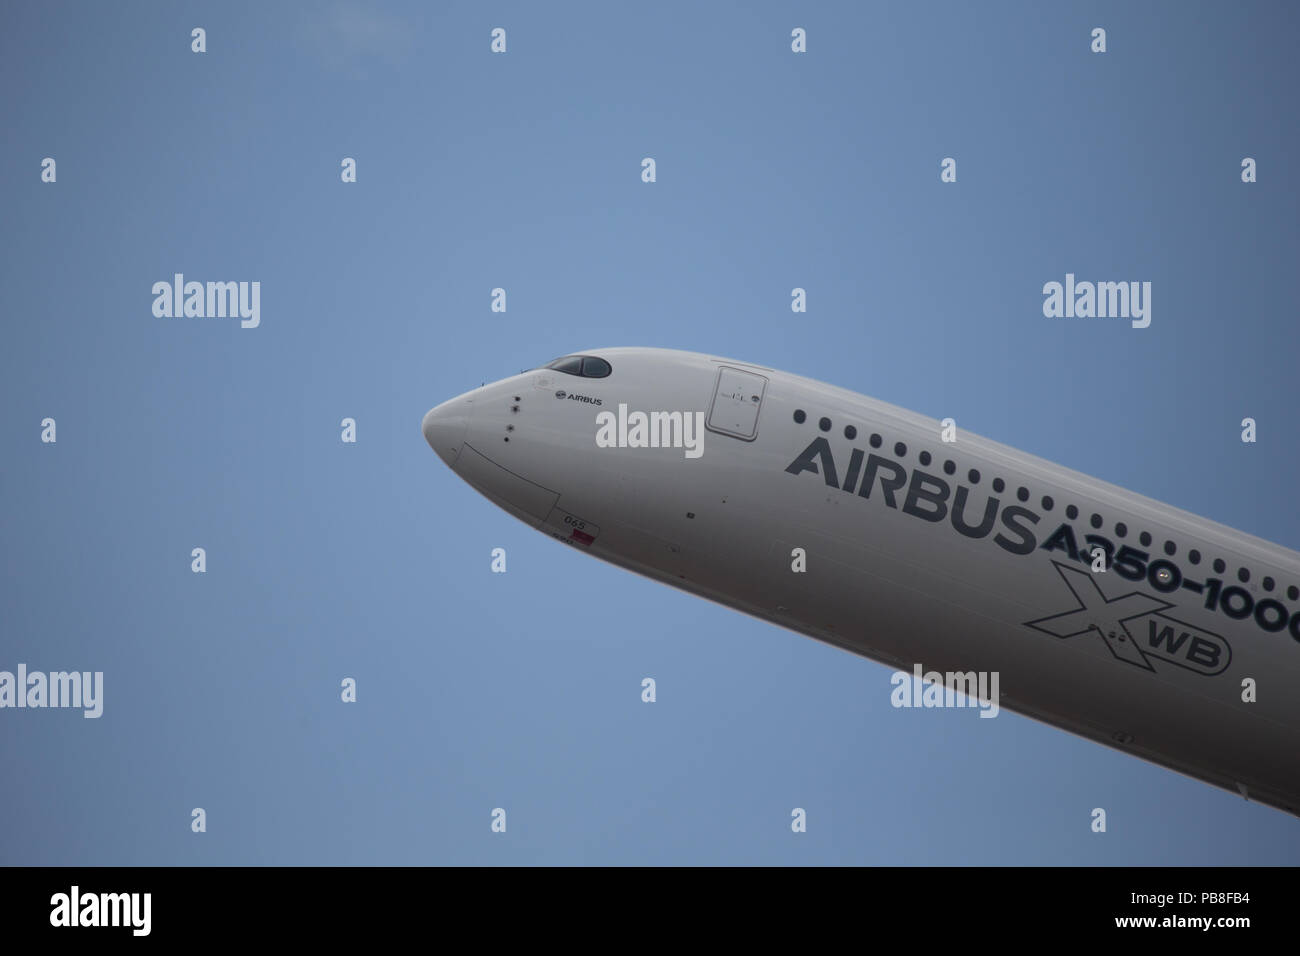 airbus a350-1000 Stock Photo